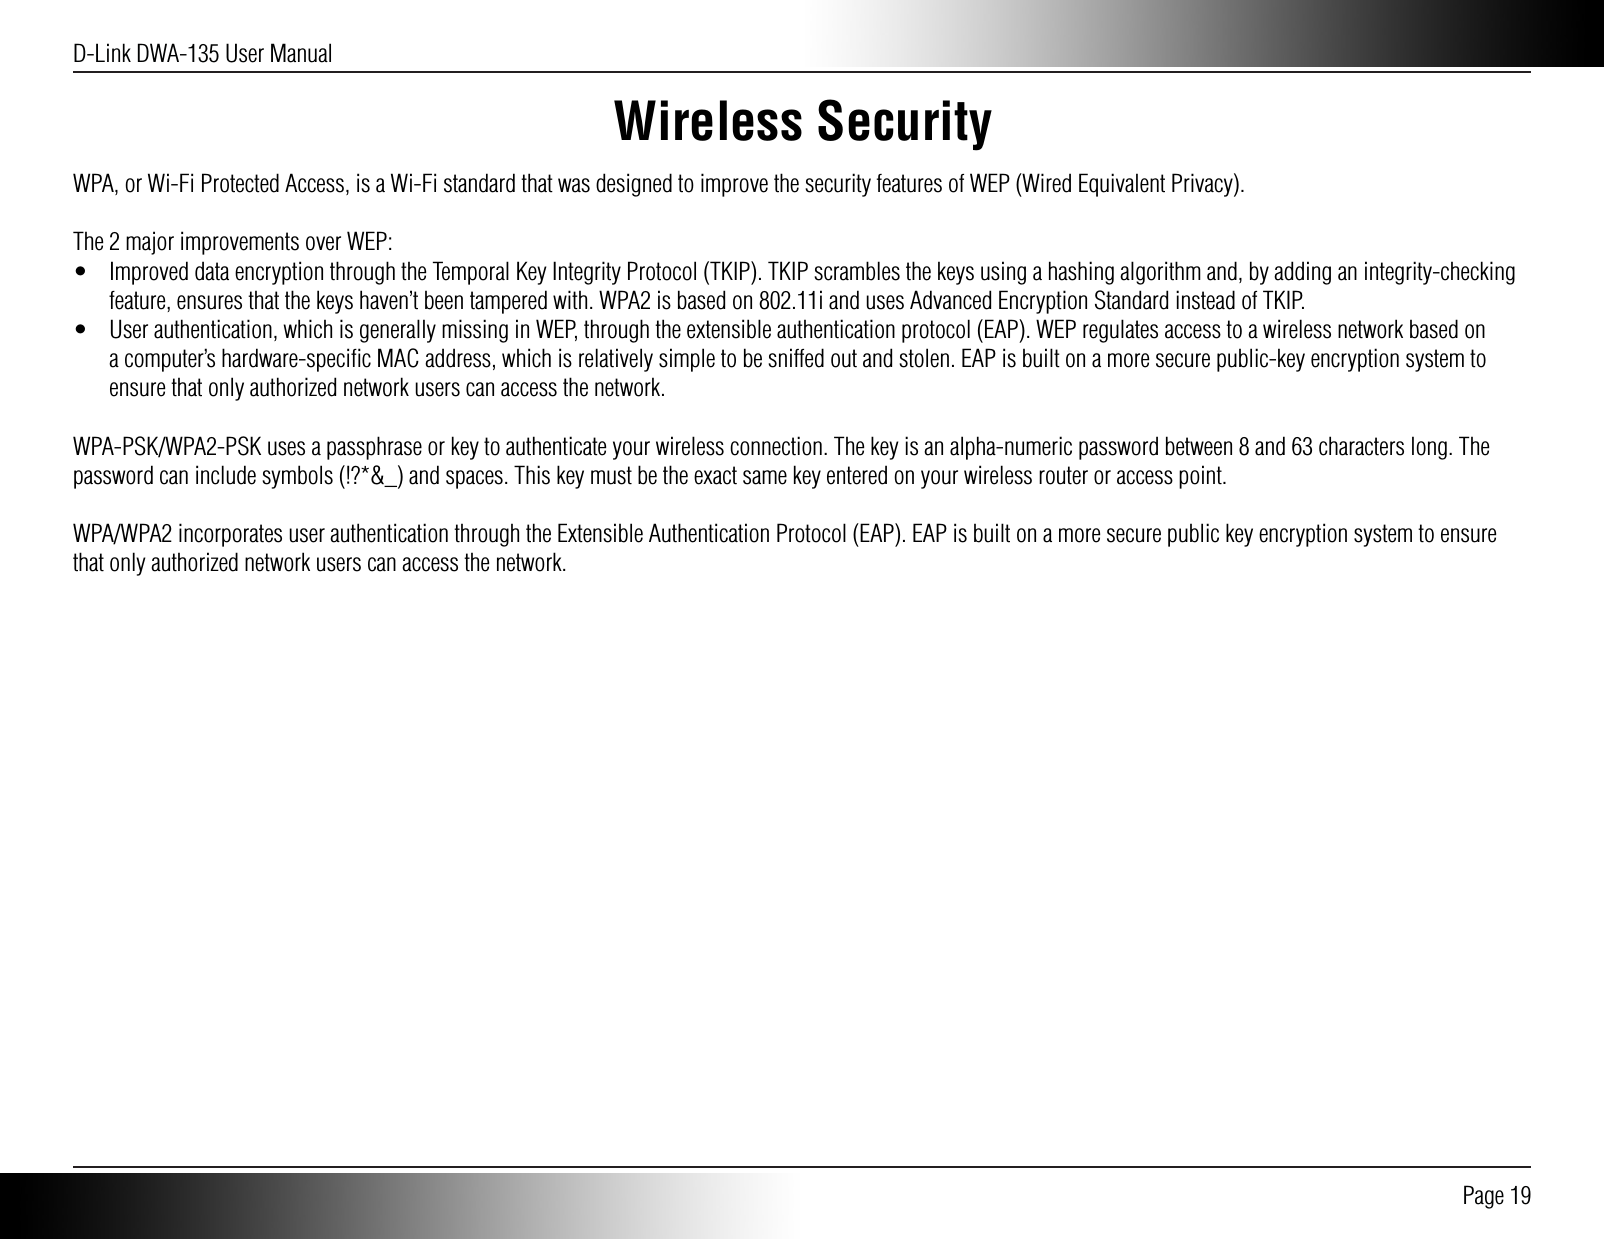 D-Link DWA-135 User Manual Page 19Wireless SecurityWPA, or Wi-Fi Protected Access, is a Wi-Fi standard that was designed to improve the security features of WEP (Wired Equivalent Privacy).The 2 major improvements over WEP:•  Improved data encryption through the Temporal Key Integrity Protocol (TKIP). TKIP scrambles the keys using a hashing algorithm and, by adding an integrity-checking feature, ensures that the keys haven’t been tampered with. WPA2 is based on 802.11i and uses Advanced Encryption Standard instead of TKIP.•  User authentication, which is generally missing in WEP, through the extensible authentication protocol (EAP). WEP regulates access to a wireless network based on a computer’s hardware-speciﬁc MAC address, which is relatively simple to be sniffed out and stolen. EAP is built on a more secure public-key encryption system to ensure that only authorized network users can access the network.WPA-PSK/WPA2-PSK uses a passphrase or key to authenticate your wireless connection. The key is an alpha-numeric password between 8 and 63 characters long. The password can include symbols (!?*&amp;_) and spaces. This key must be the exact same key entered on your wireless router or access point.WPA/WPA2 incorporates user authentication through the Extensible Authentication Protocol (EAP). EAP is built on a more secure public key encryption system to ensure that only authorized network users can access the network.